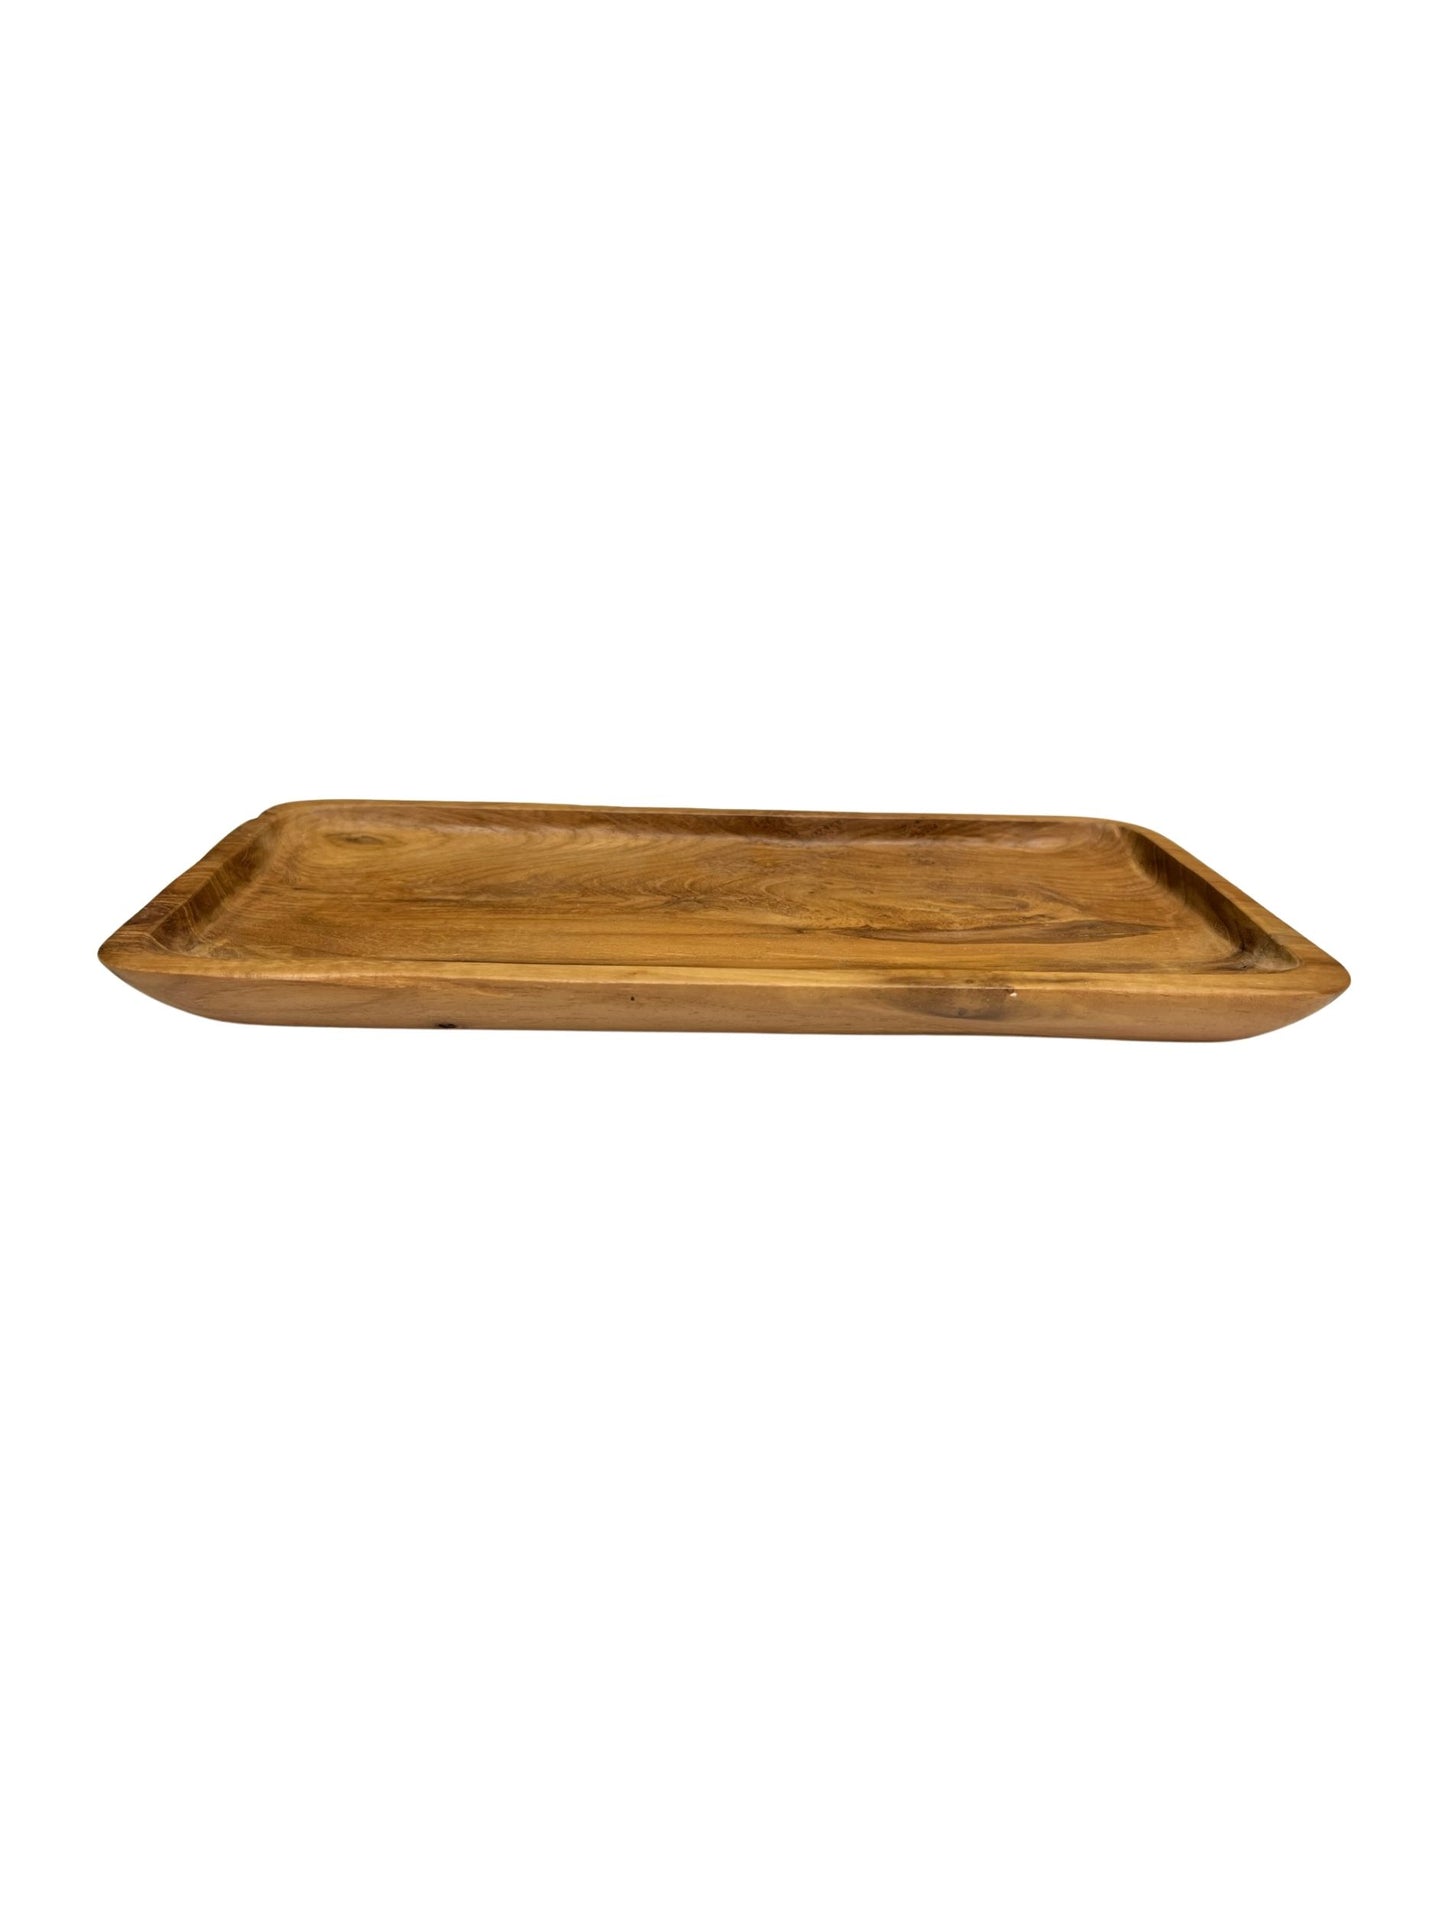 Eclectic Home Accent Teak Tray 2895 Natural  Decor Furniture